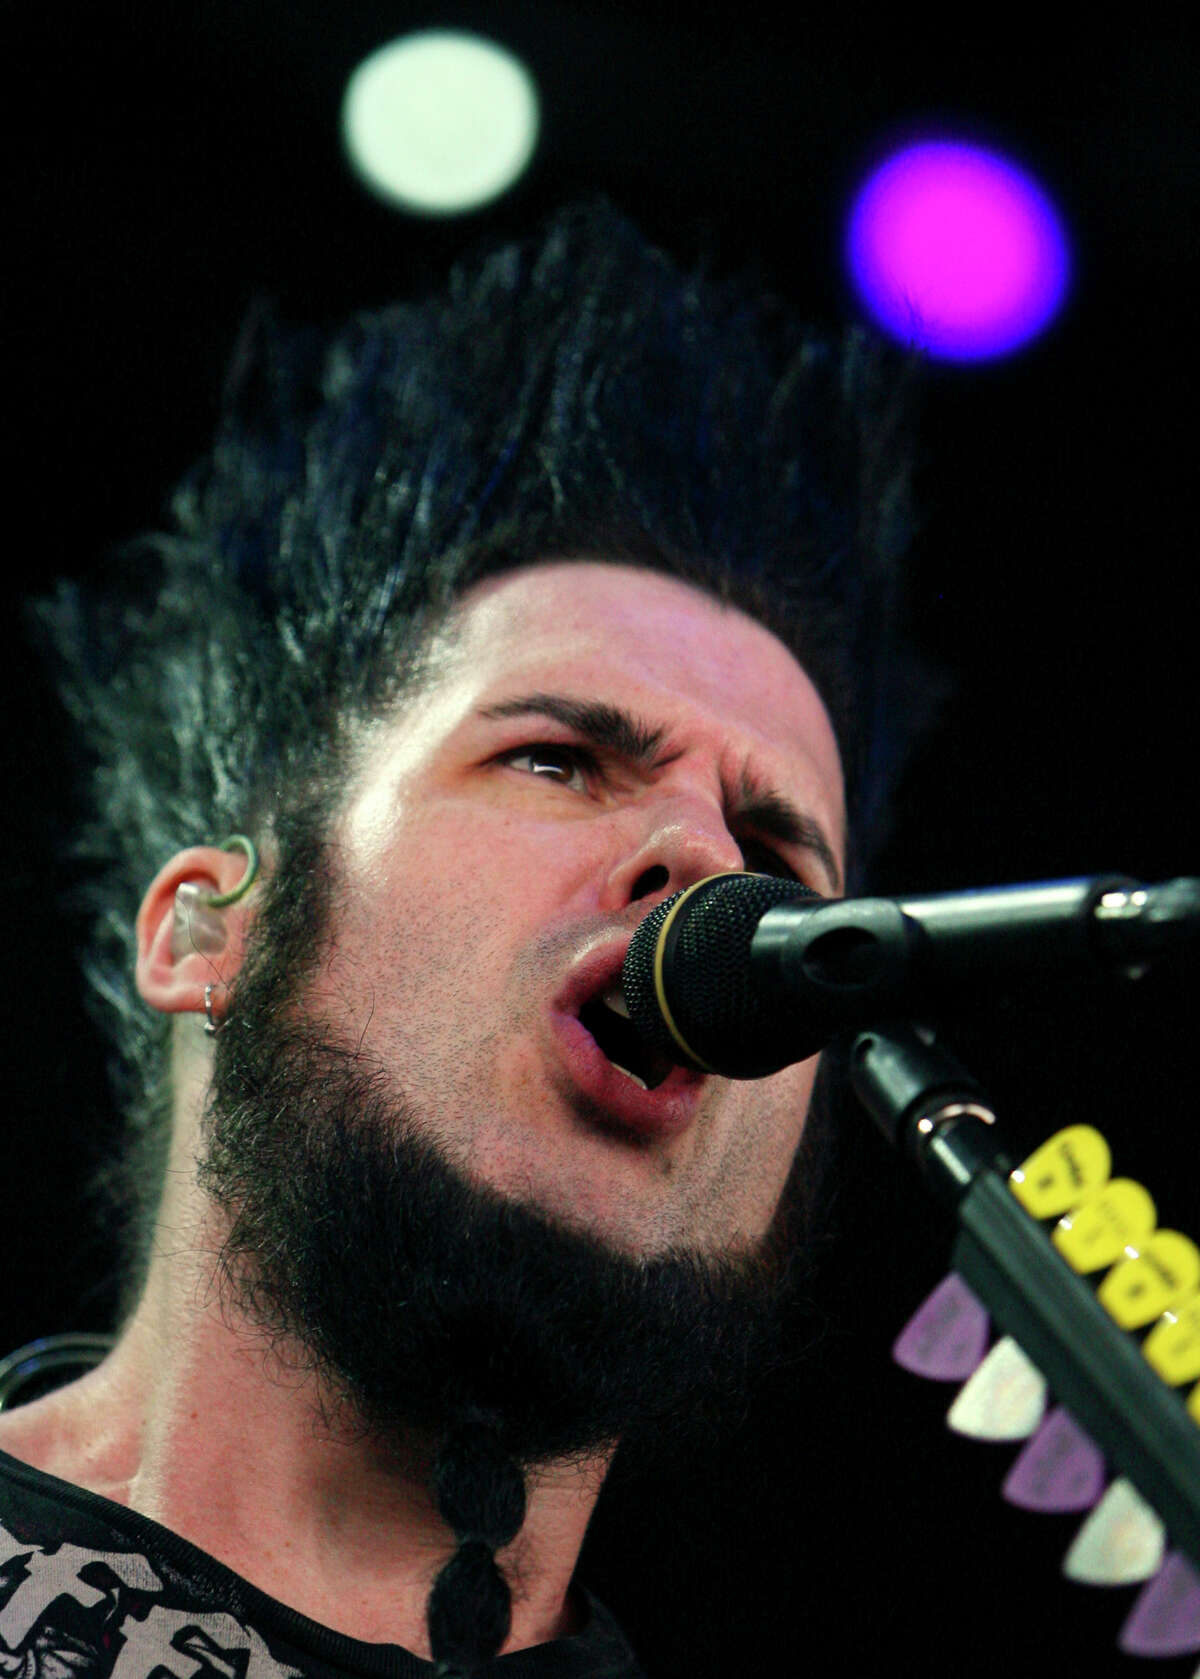 FOR METRO - Static-X's Wayne Static performs with the band during the Ozzfest 2007 Saturday Aug. 4, 2007 at the Verizon Wireless Amphitheater in Selma Tx. (PHOTO BY EDWARD A. ORNELAS)